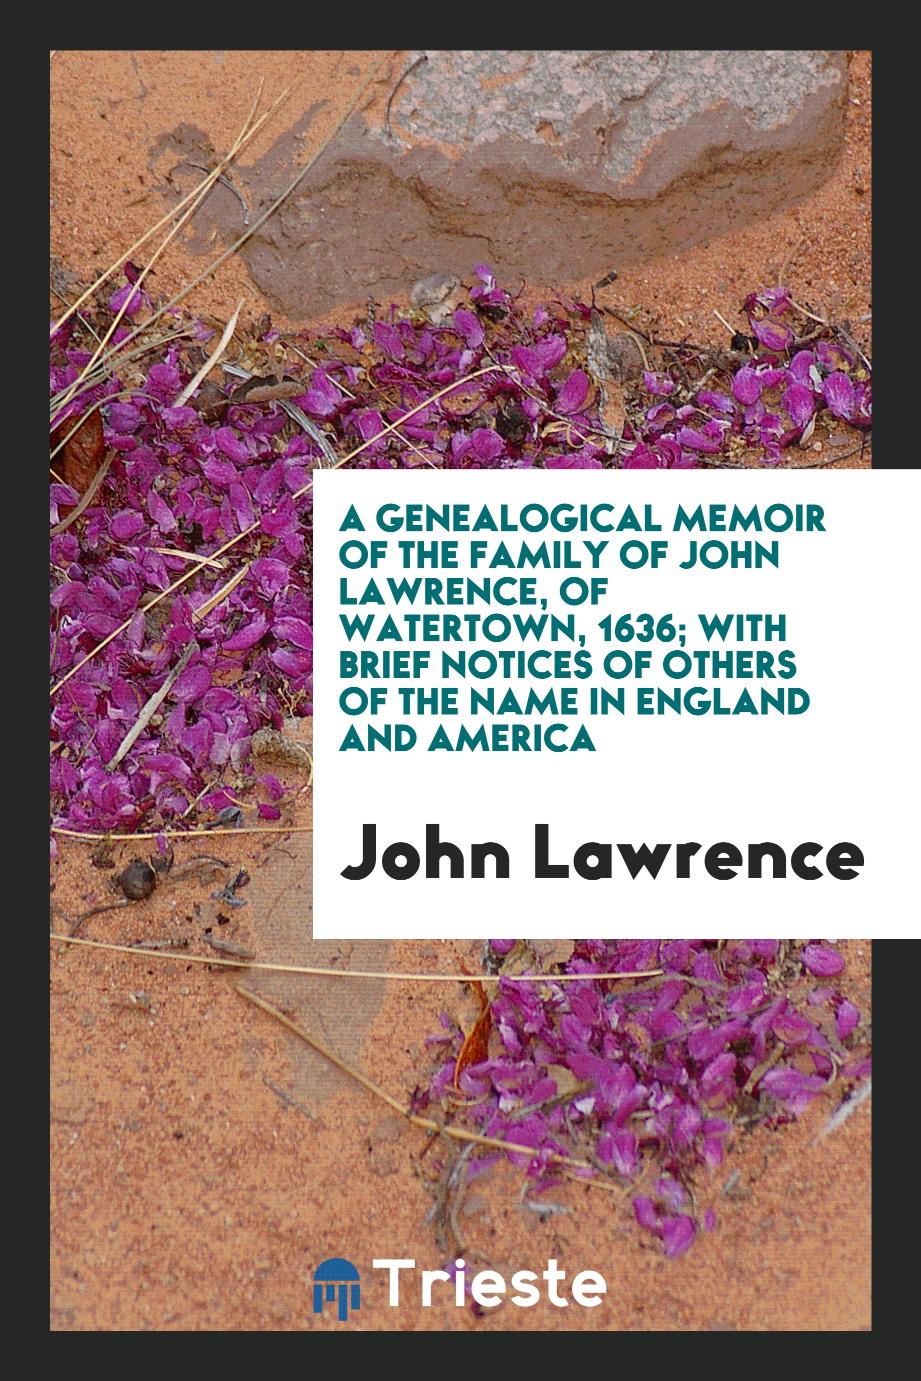 A Genealogical Memoir of the Family of John Lawrence, of Watertown, 1636; With Brief Notices of Others of the Name in England and America